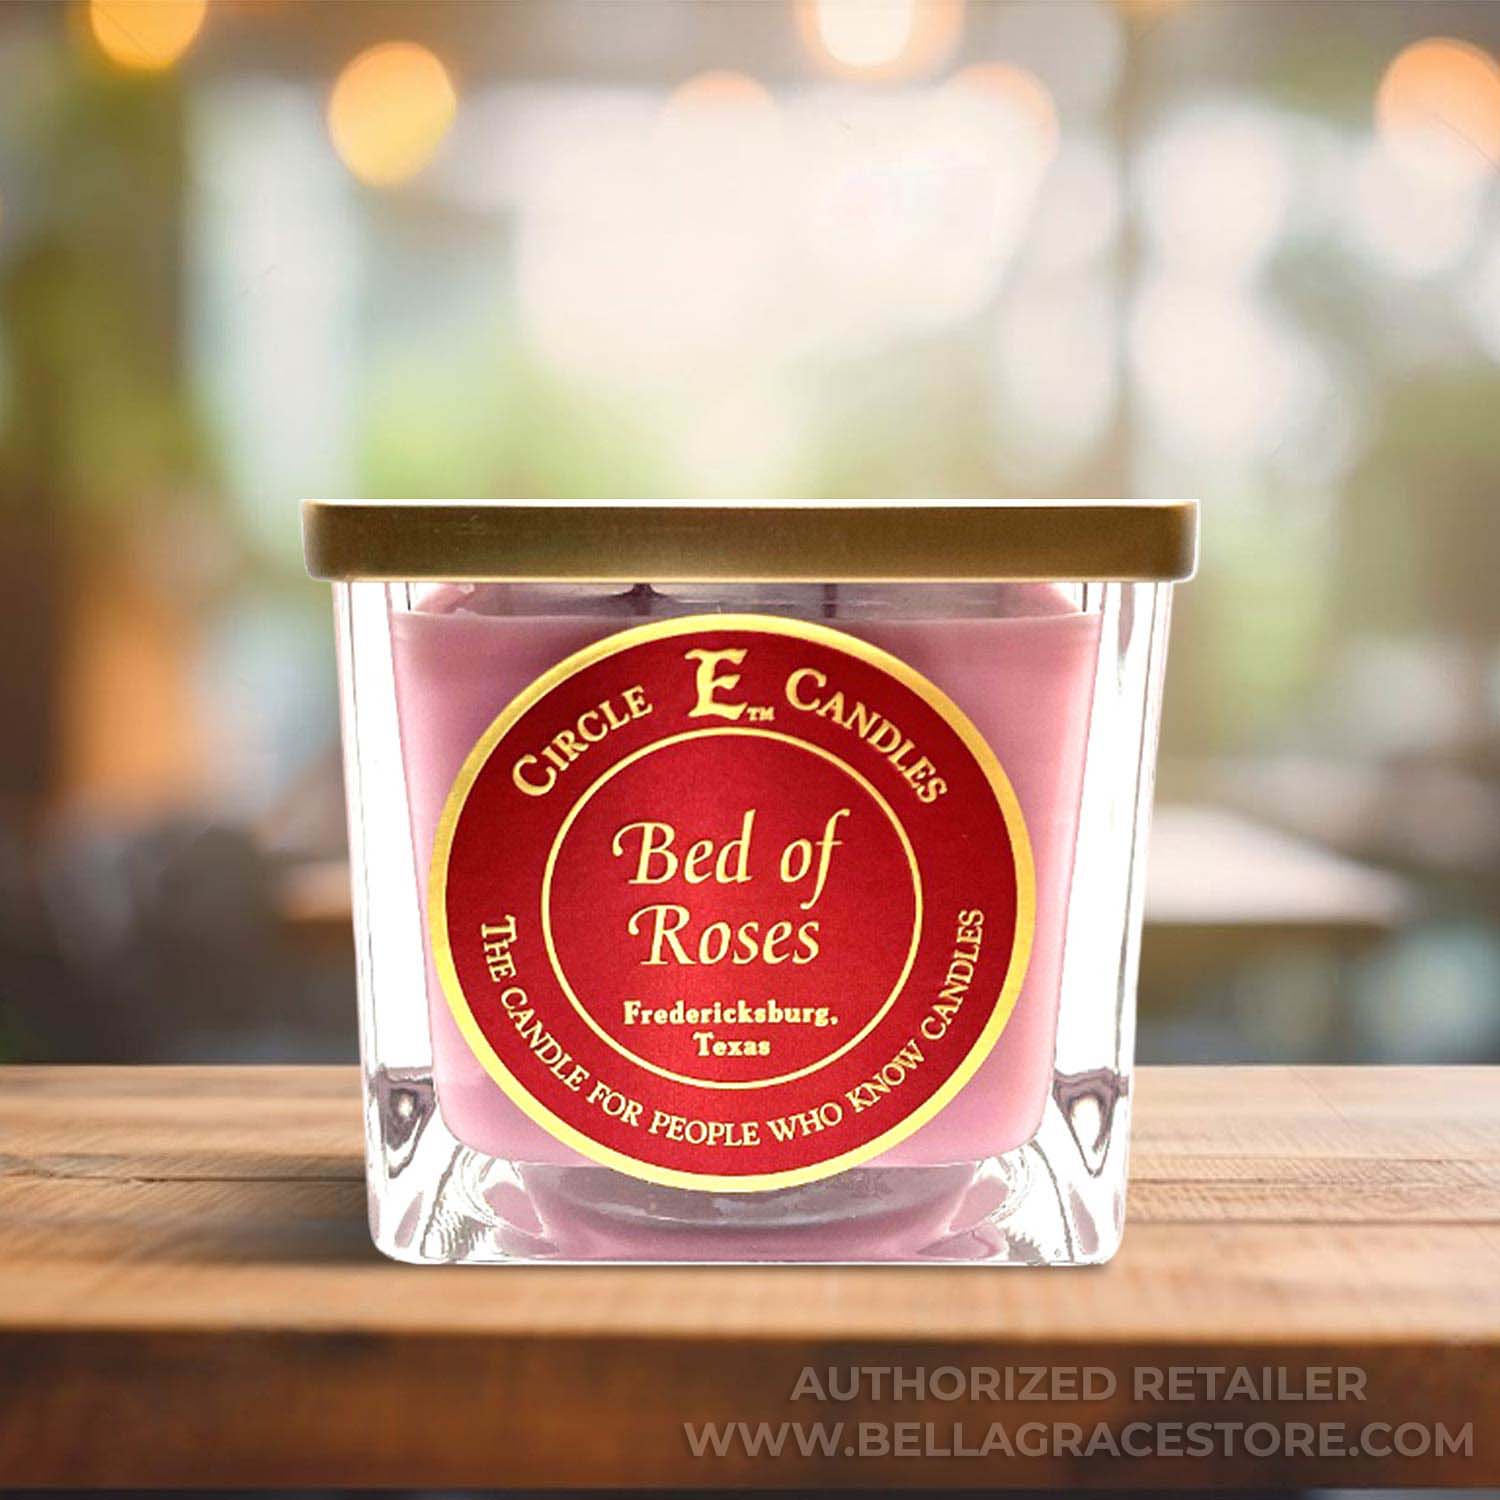 Circle E Candles, Bed of Roses Scent, Large Size Jar Candle, 43oz, 4 Wicks